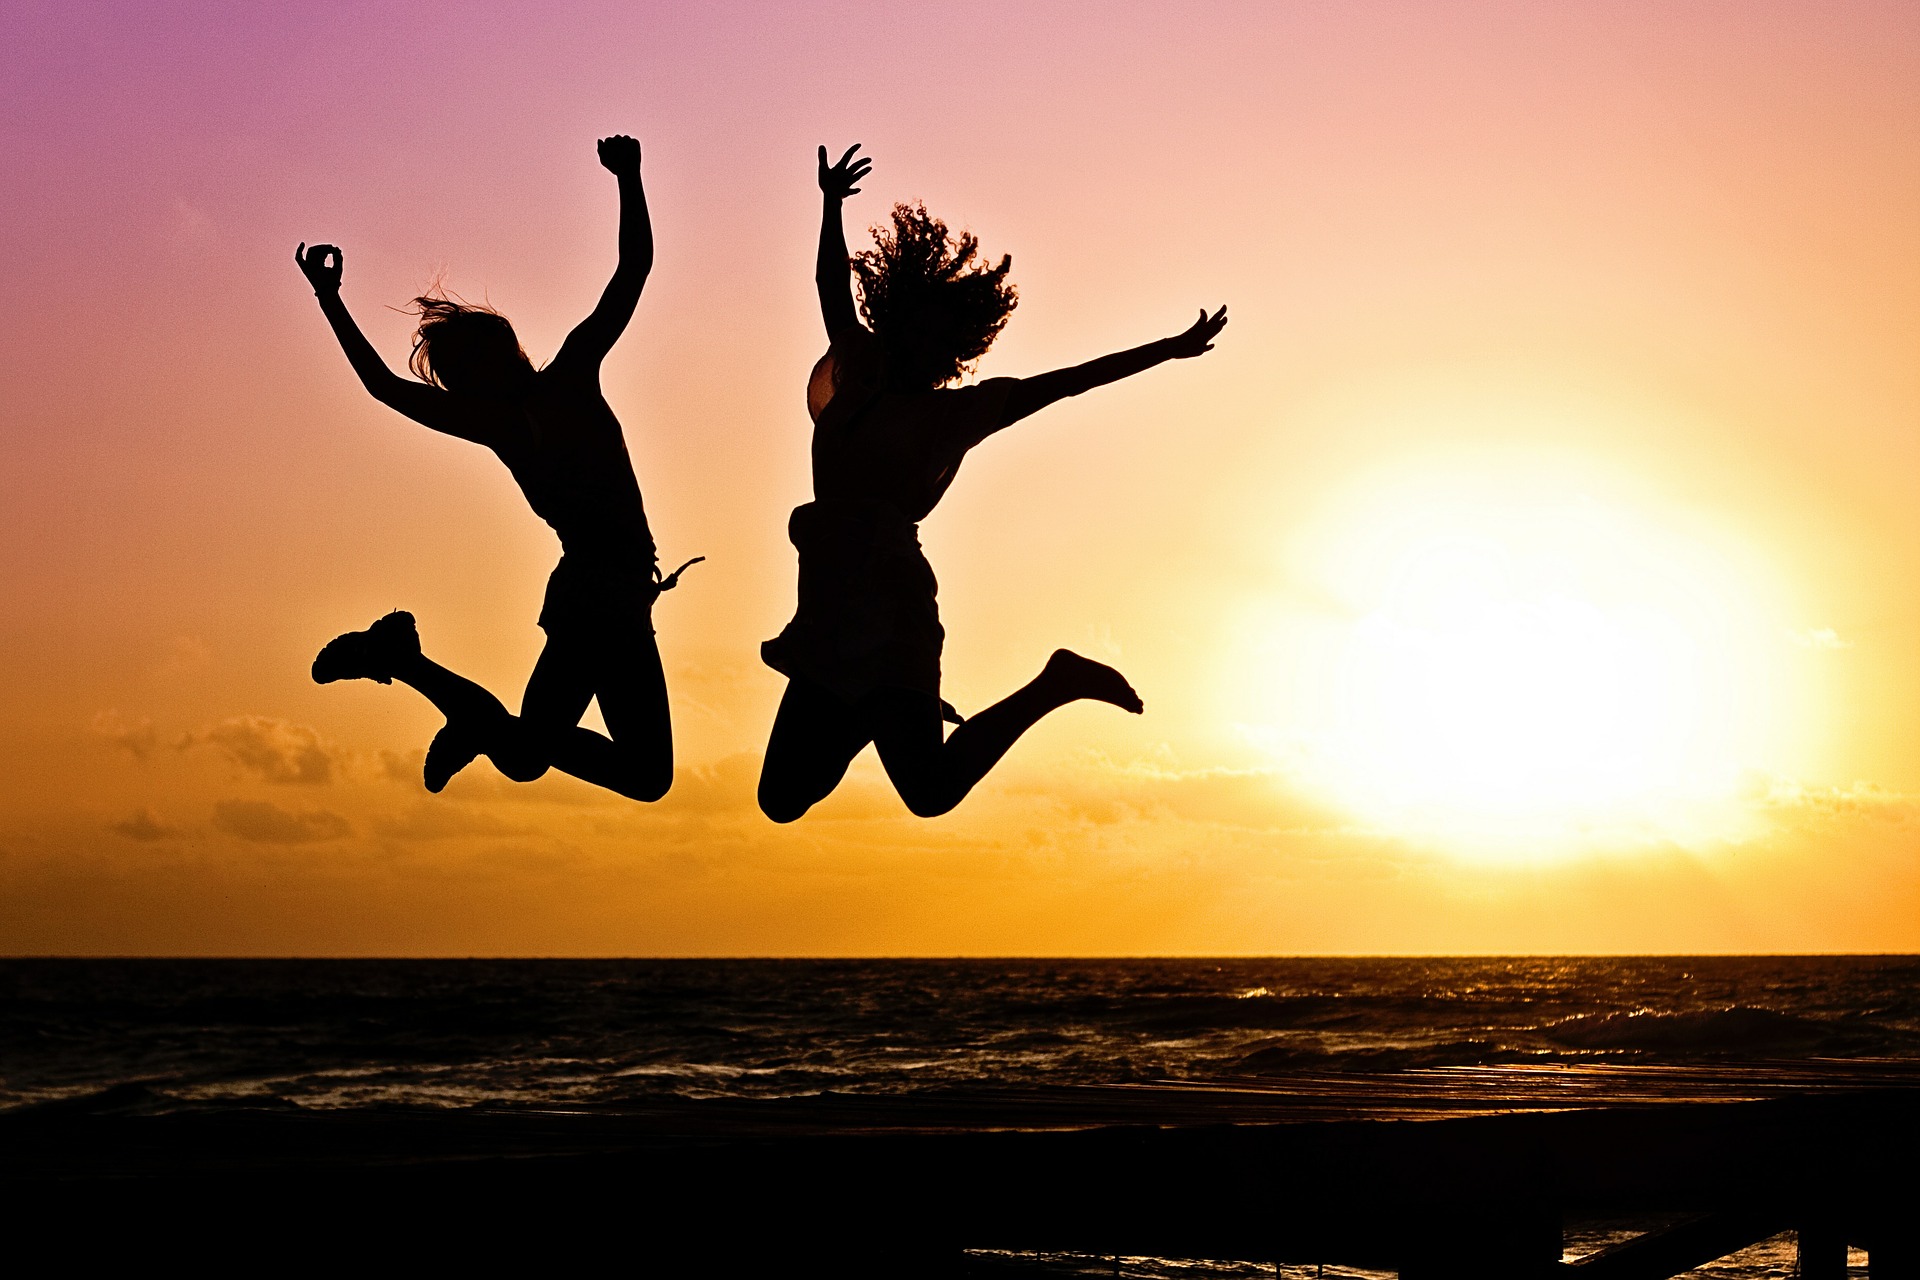 Two silhouettes of people jumping high with their arms aloft in front of a sunset backdrop.